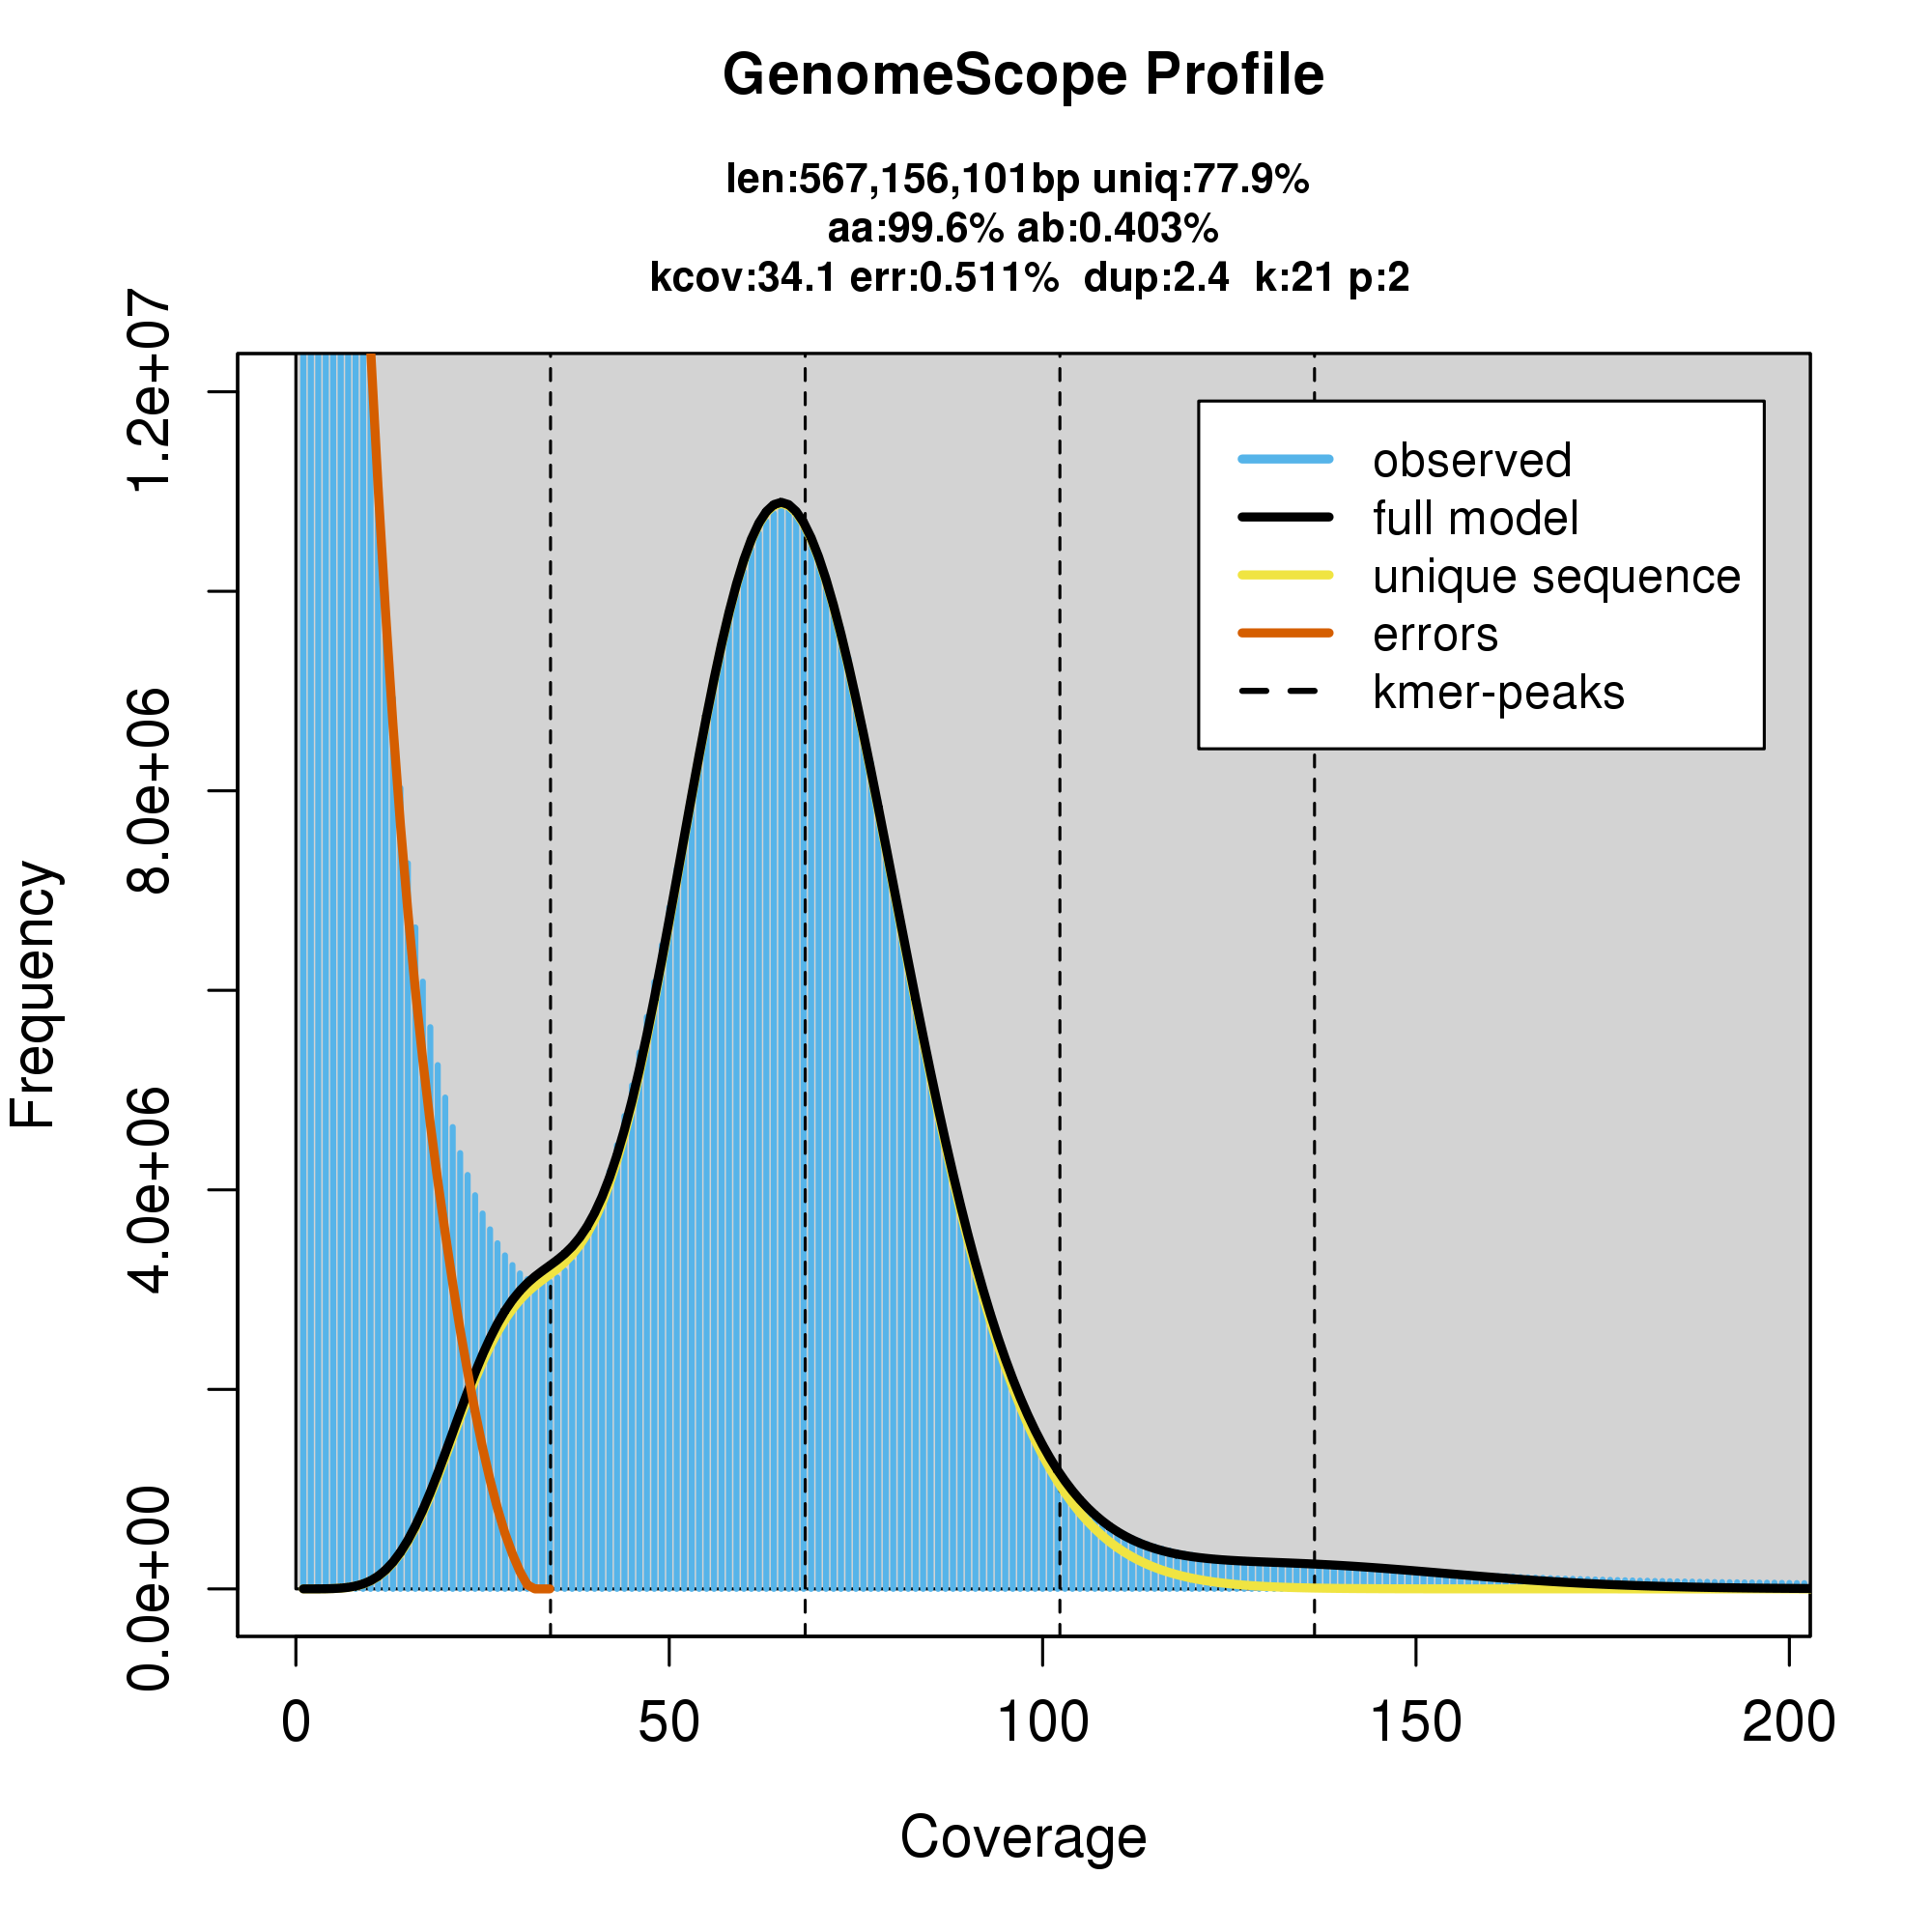 Example of a GenomeScope output.